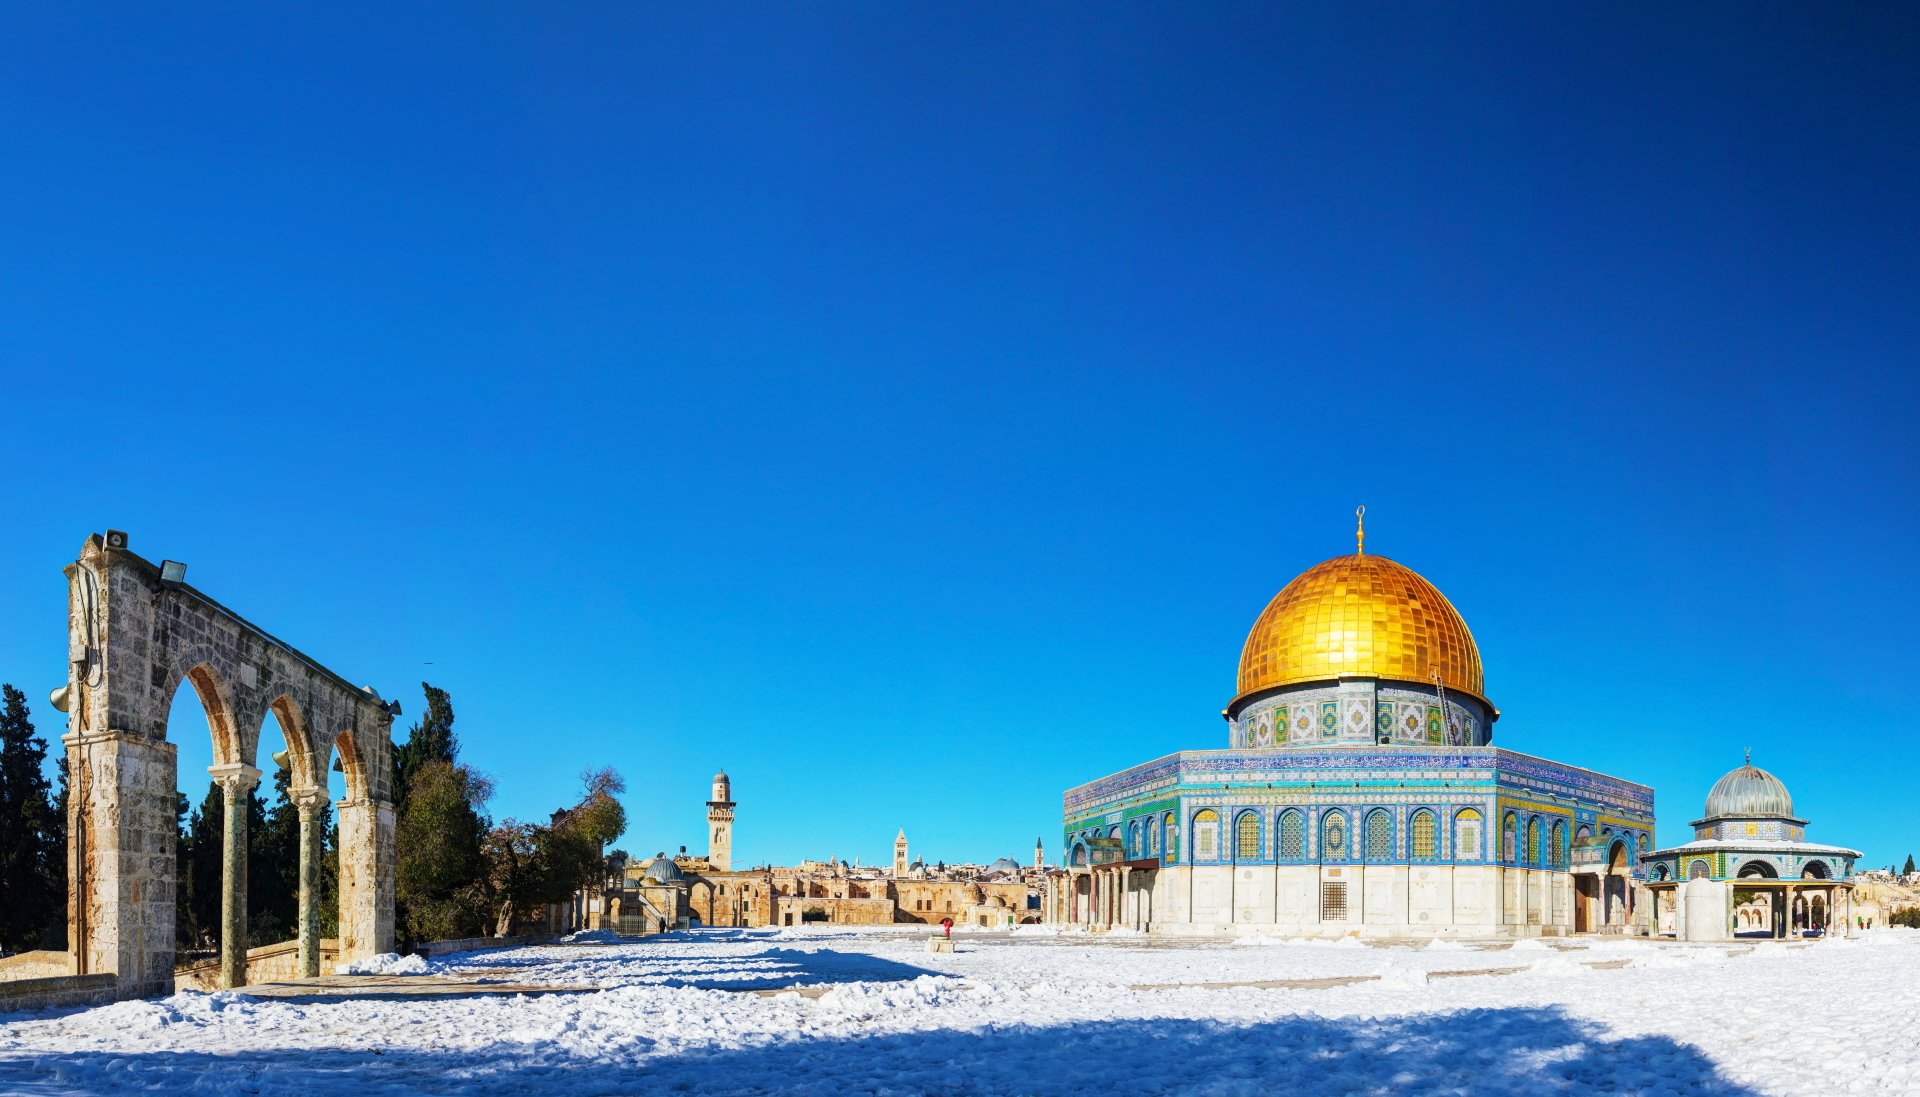 Download Israel Jerusalem Shrine Dome Religious Dome Of The Rock  4k Ultra HD Wallpaper